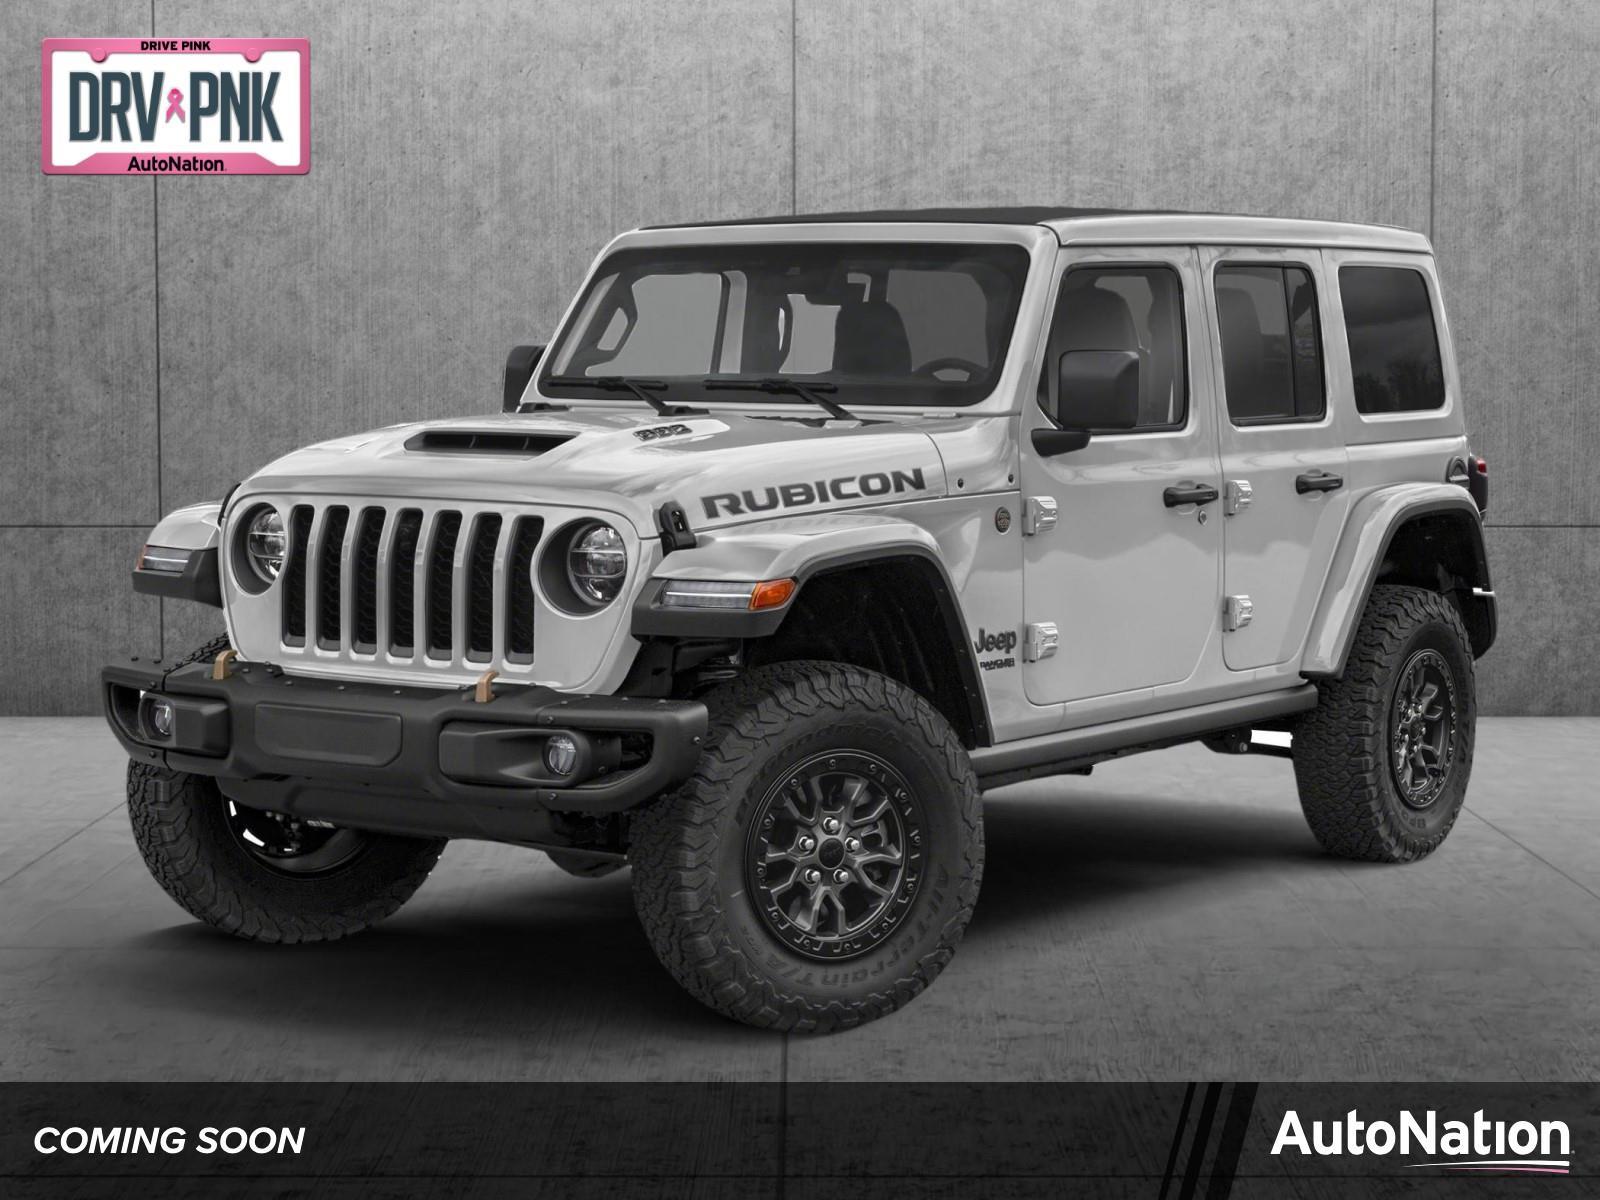 NEW 2023 Jeep Wrangler for sale in Golden, CO 80401 - AutoNation